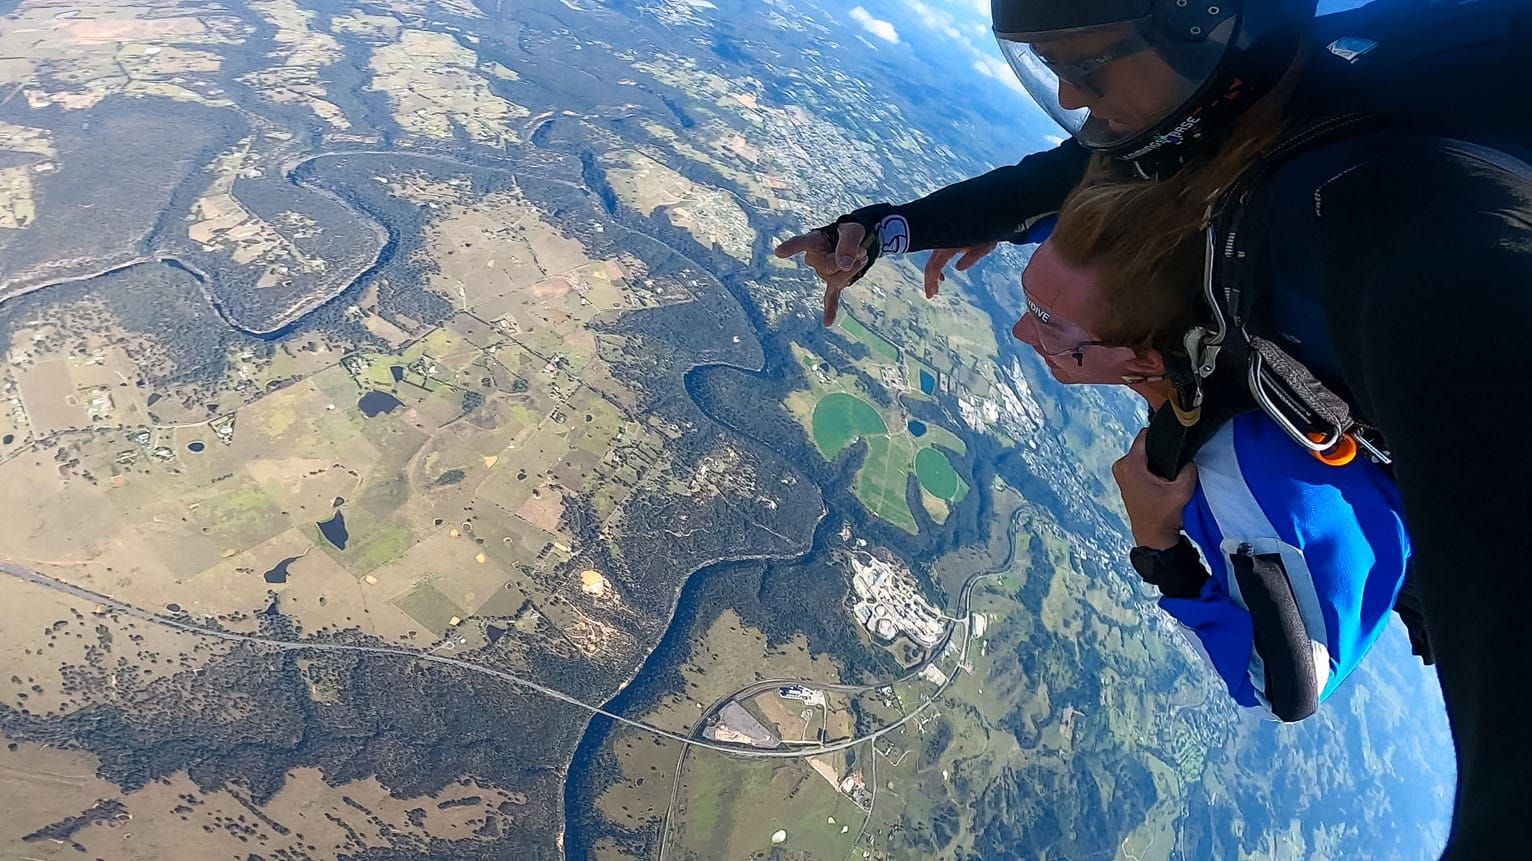 View while Skydiving Sydney Australia